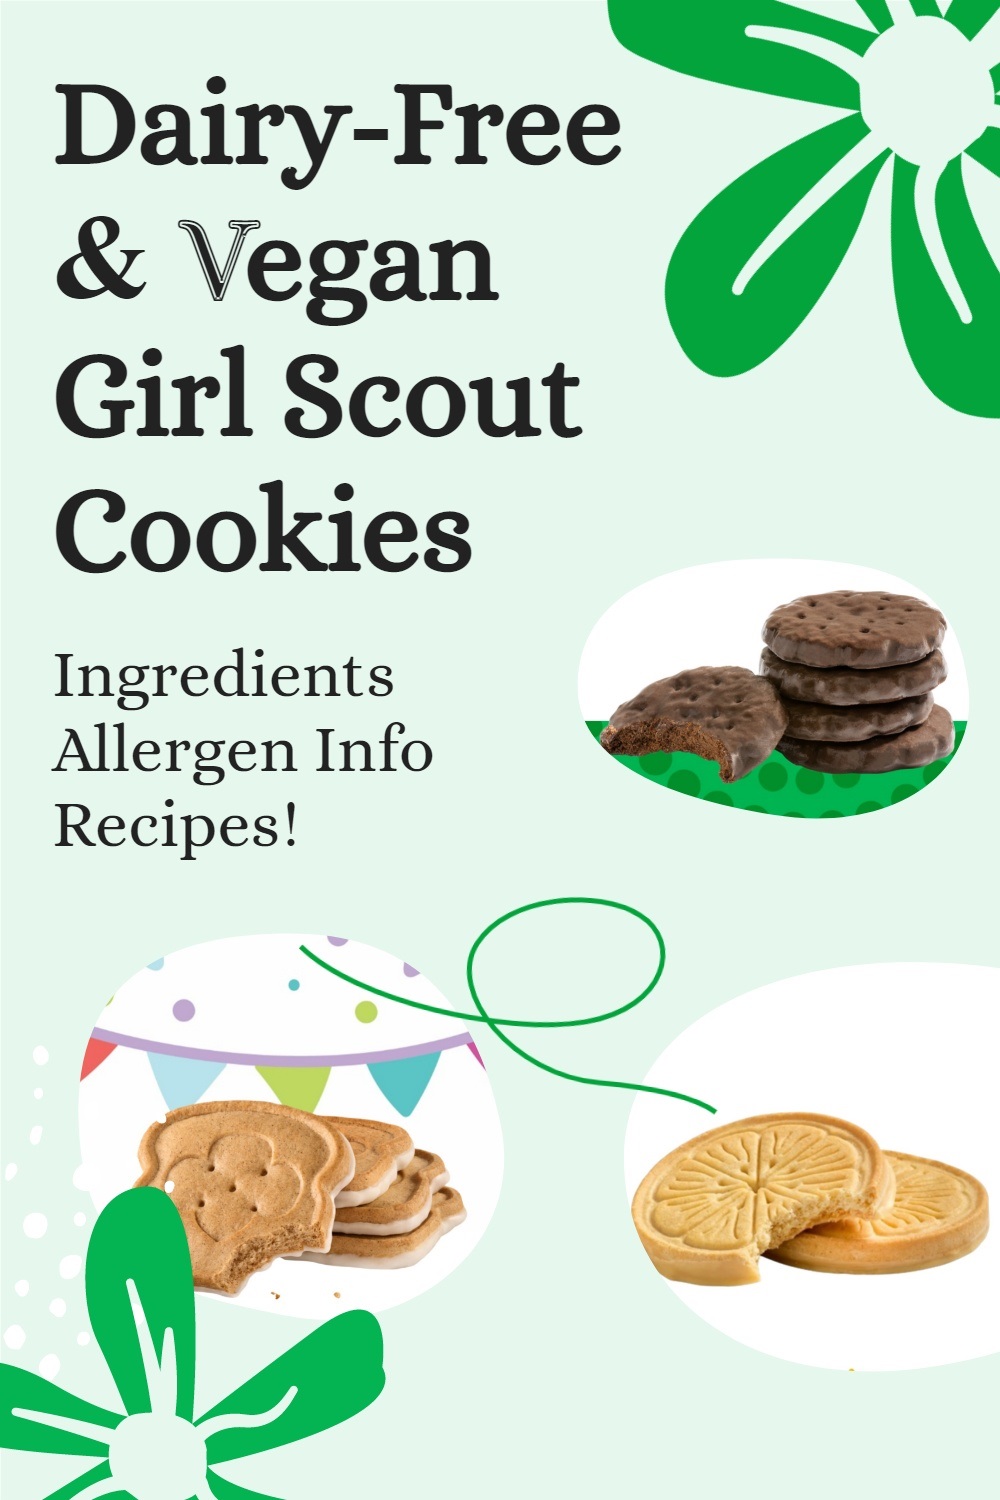 All Dairy-Free Girl Scout Cookies with Vegan Options - Ingredients, Allergen Information, Bakers, Recipes, and More!